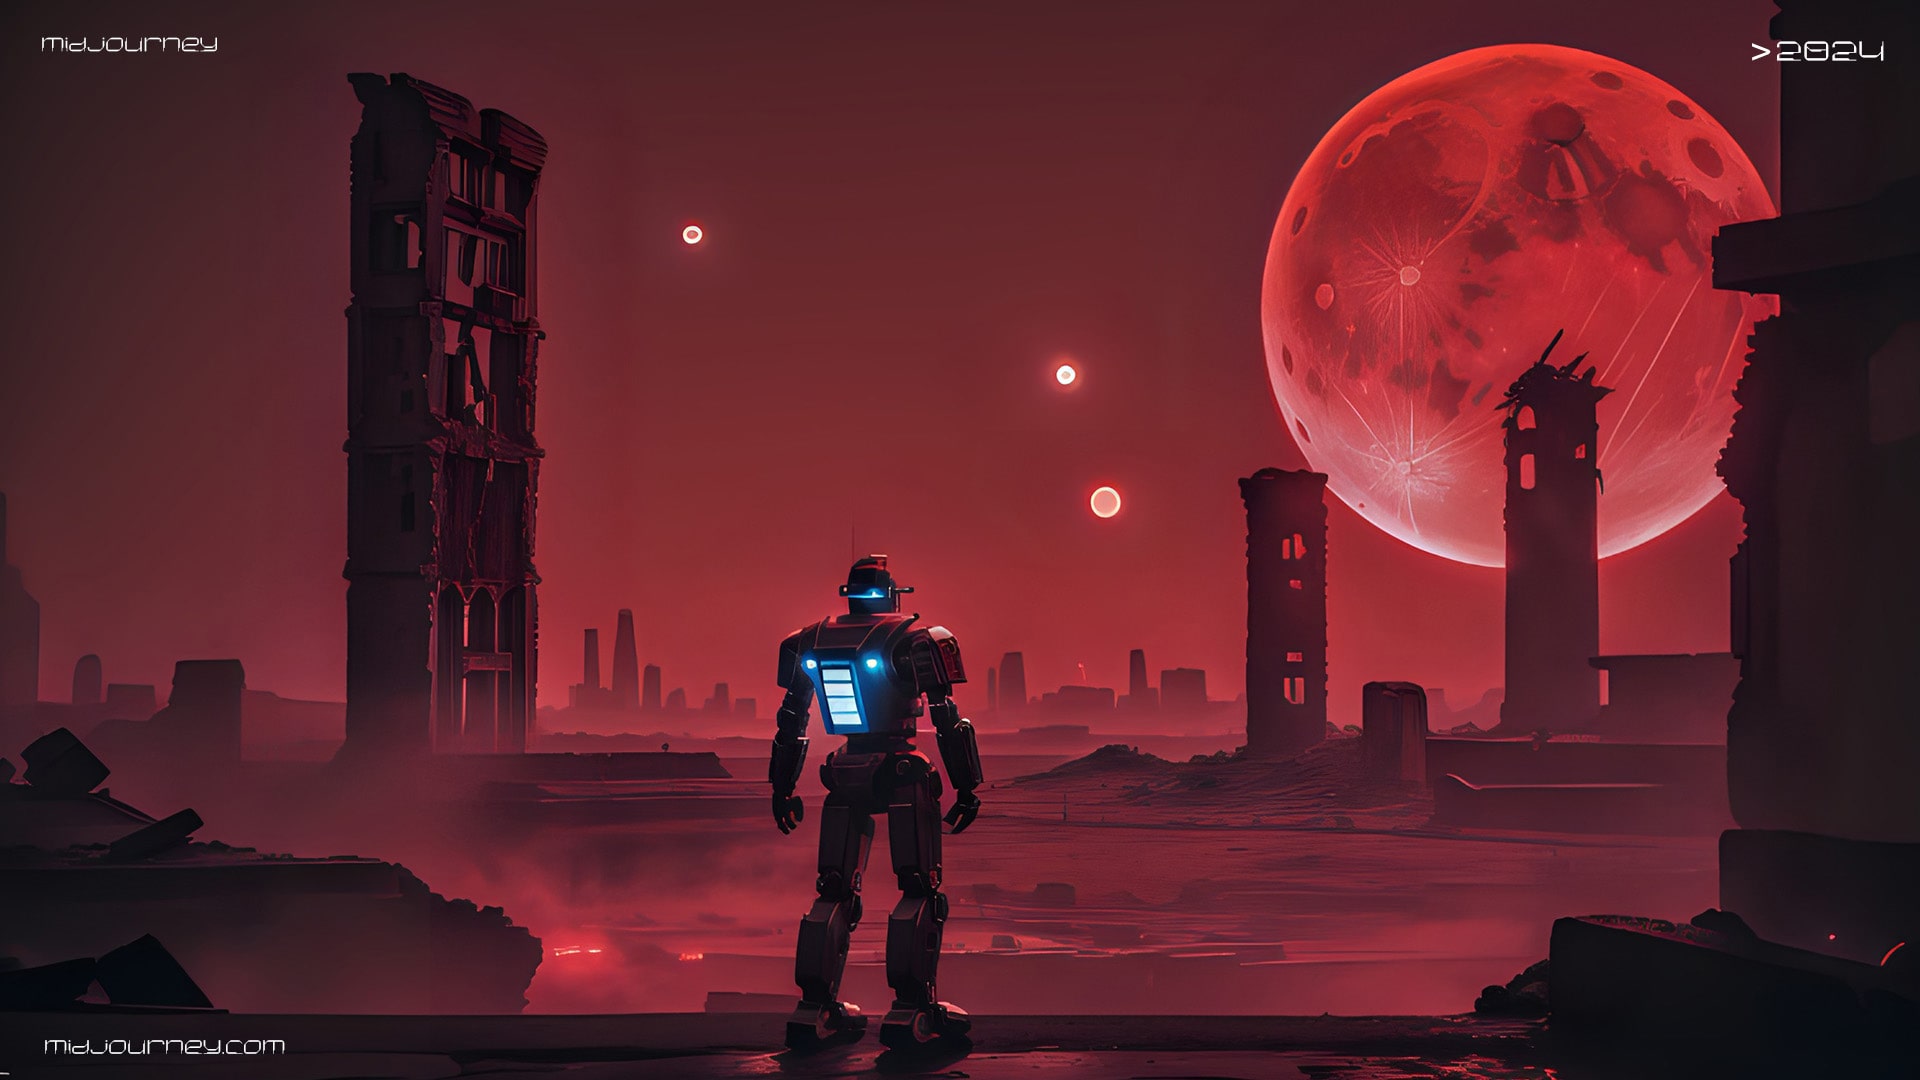 A lone robot gazing at the ruins of a futuristic city under a blood-red moon